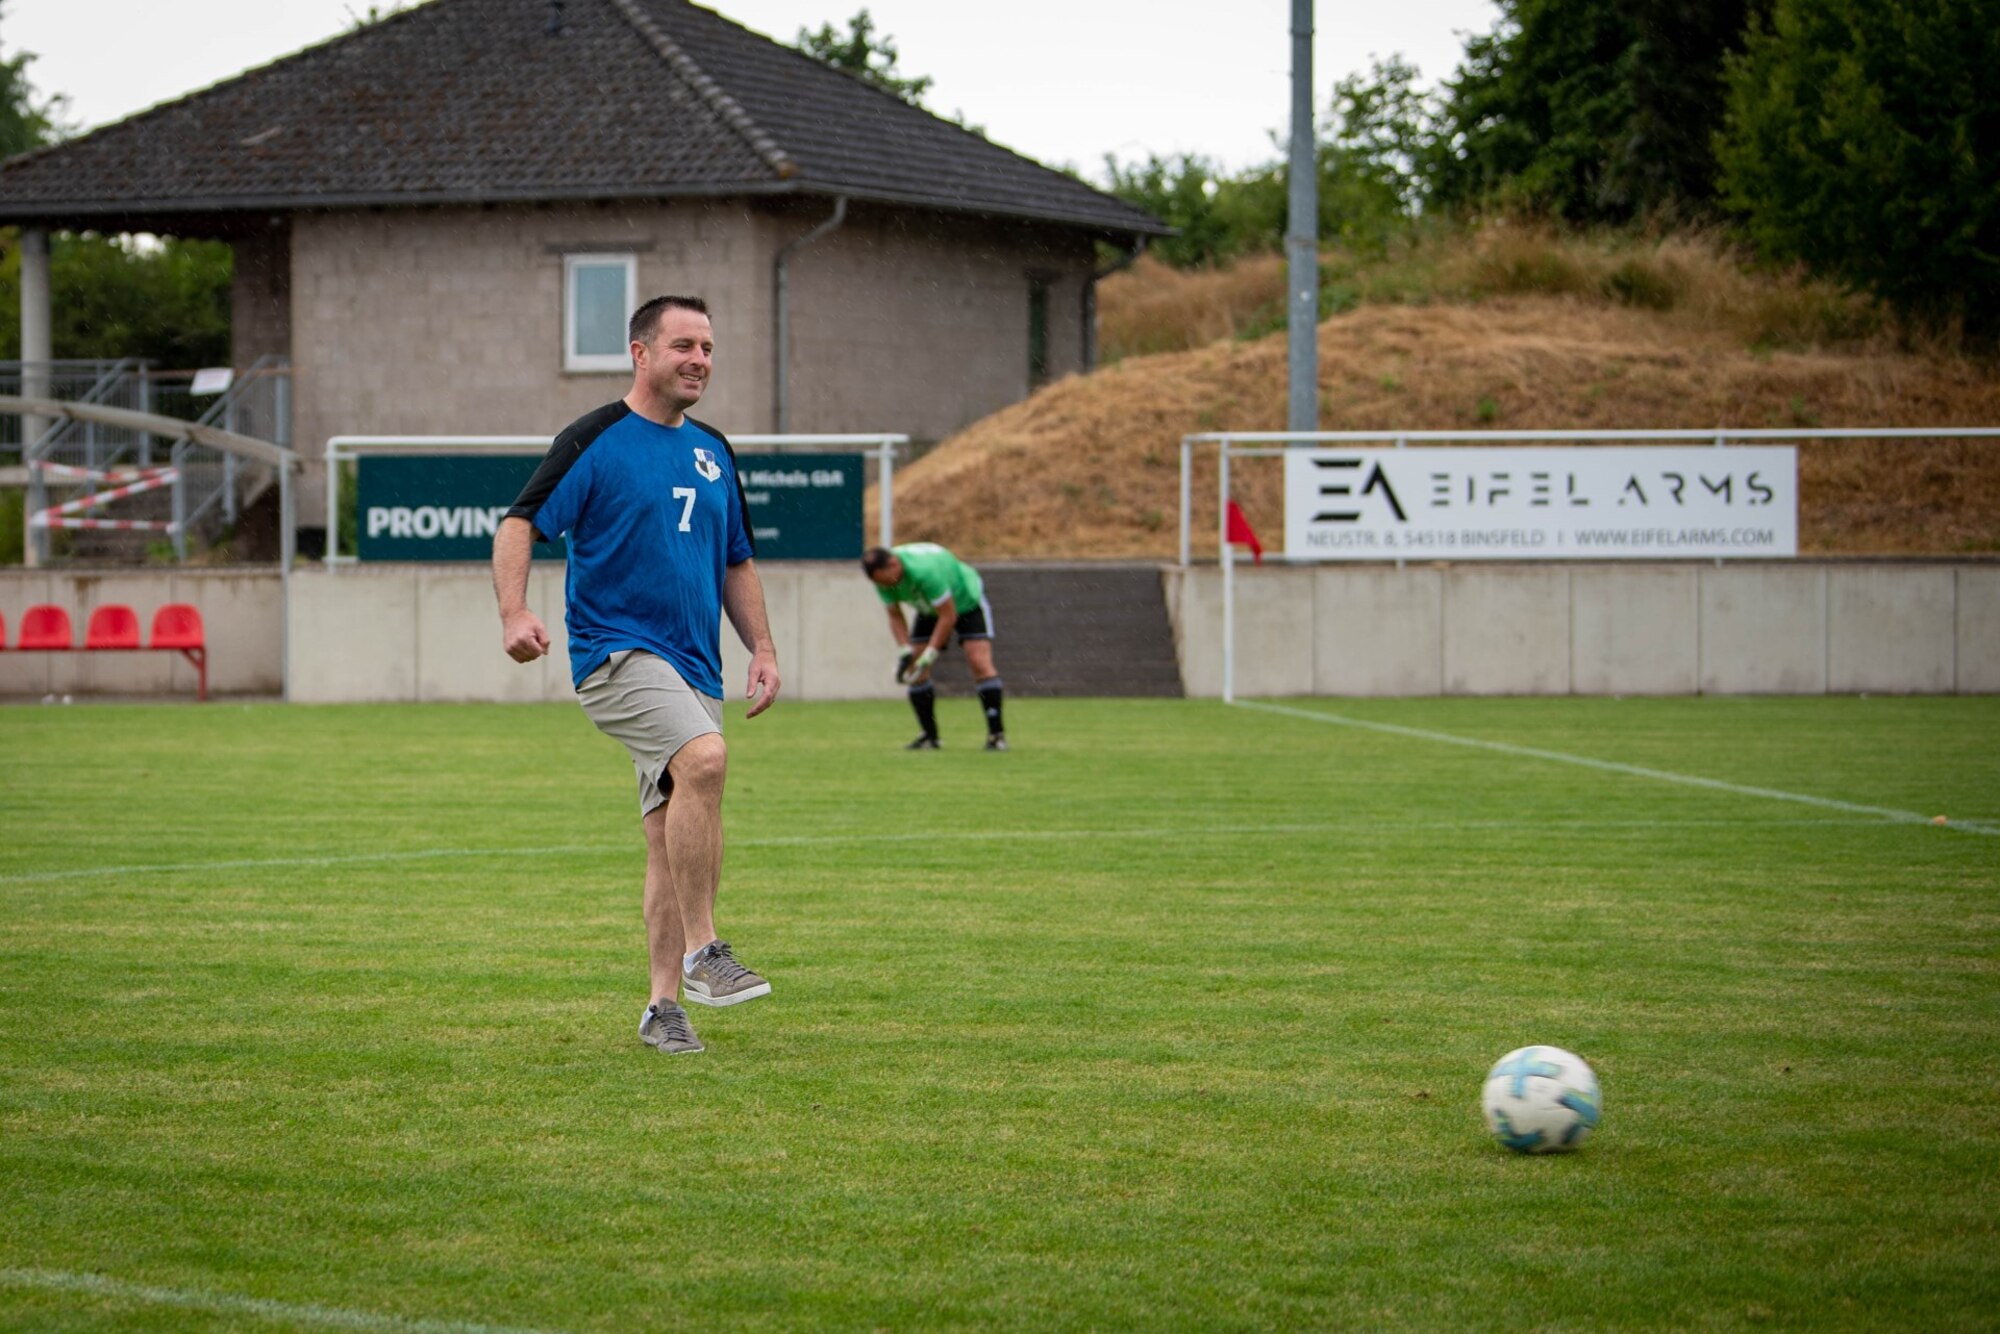 U.S. Air Force Col. Kevin Crofton, 52nd Fighter Wing commander, kicks off a soccer match between the Spangdahlem Air Base and local Binsfeld soccer teams in Binsfield, Germany, July 15, 2023.